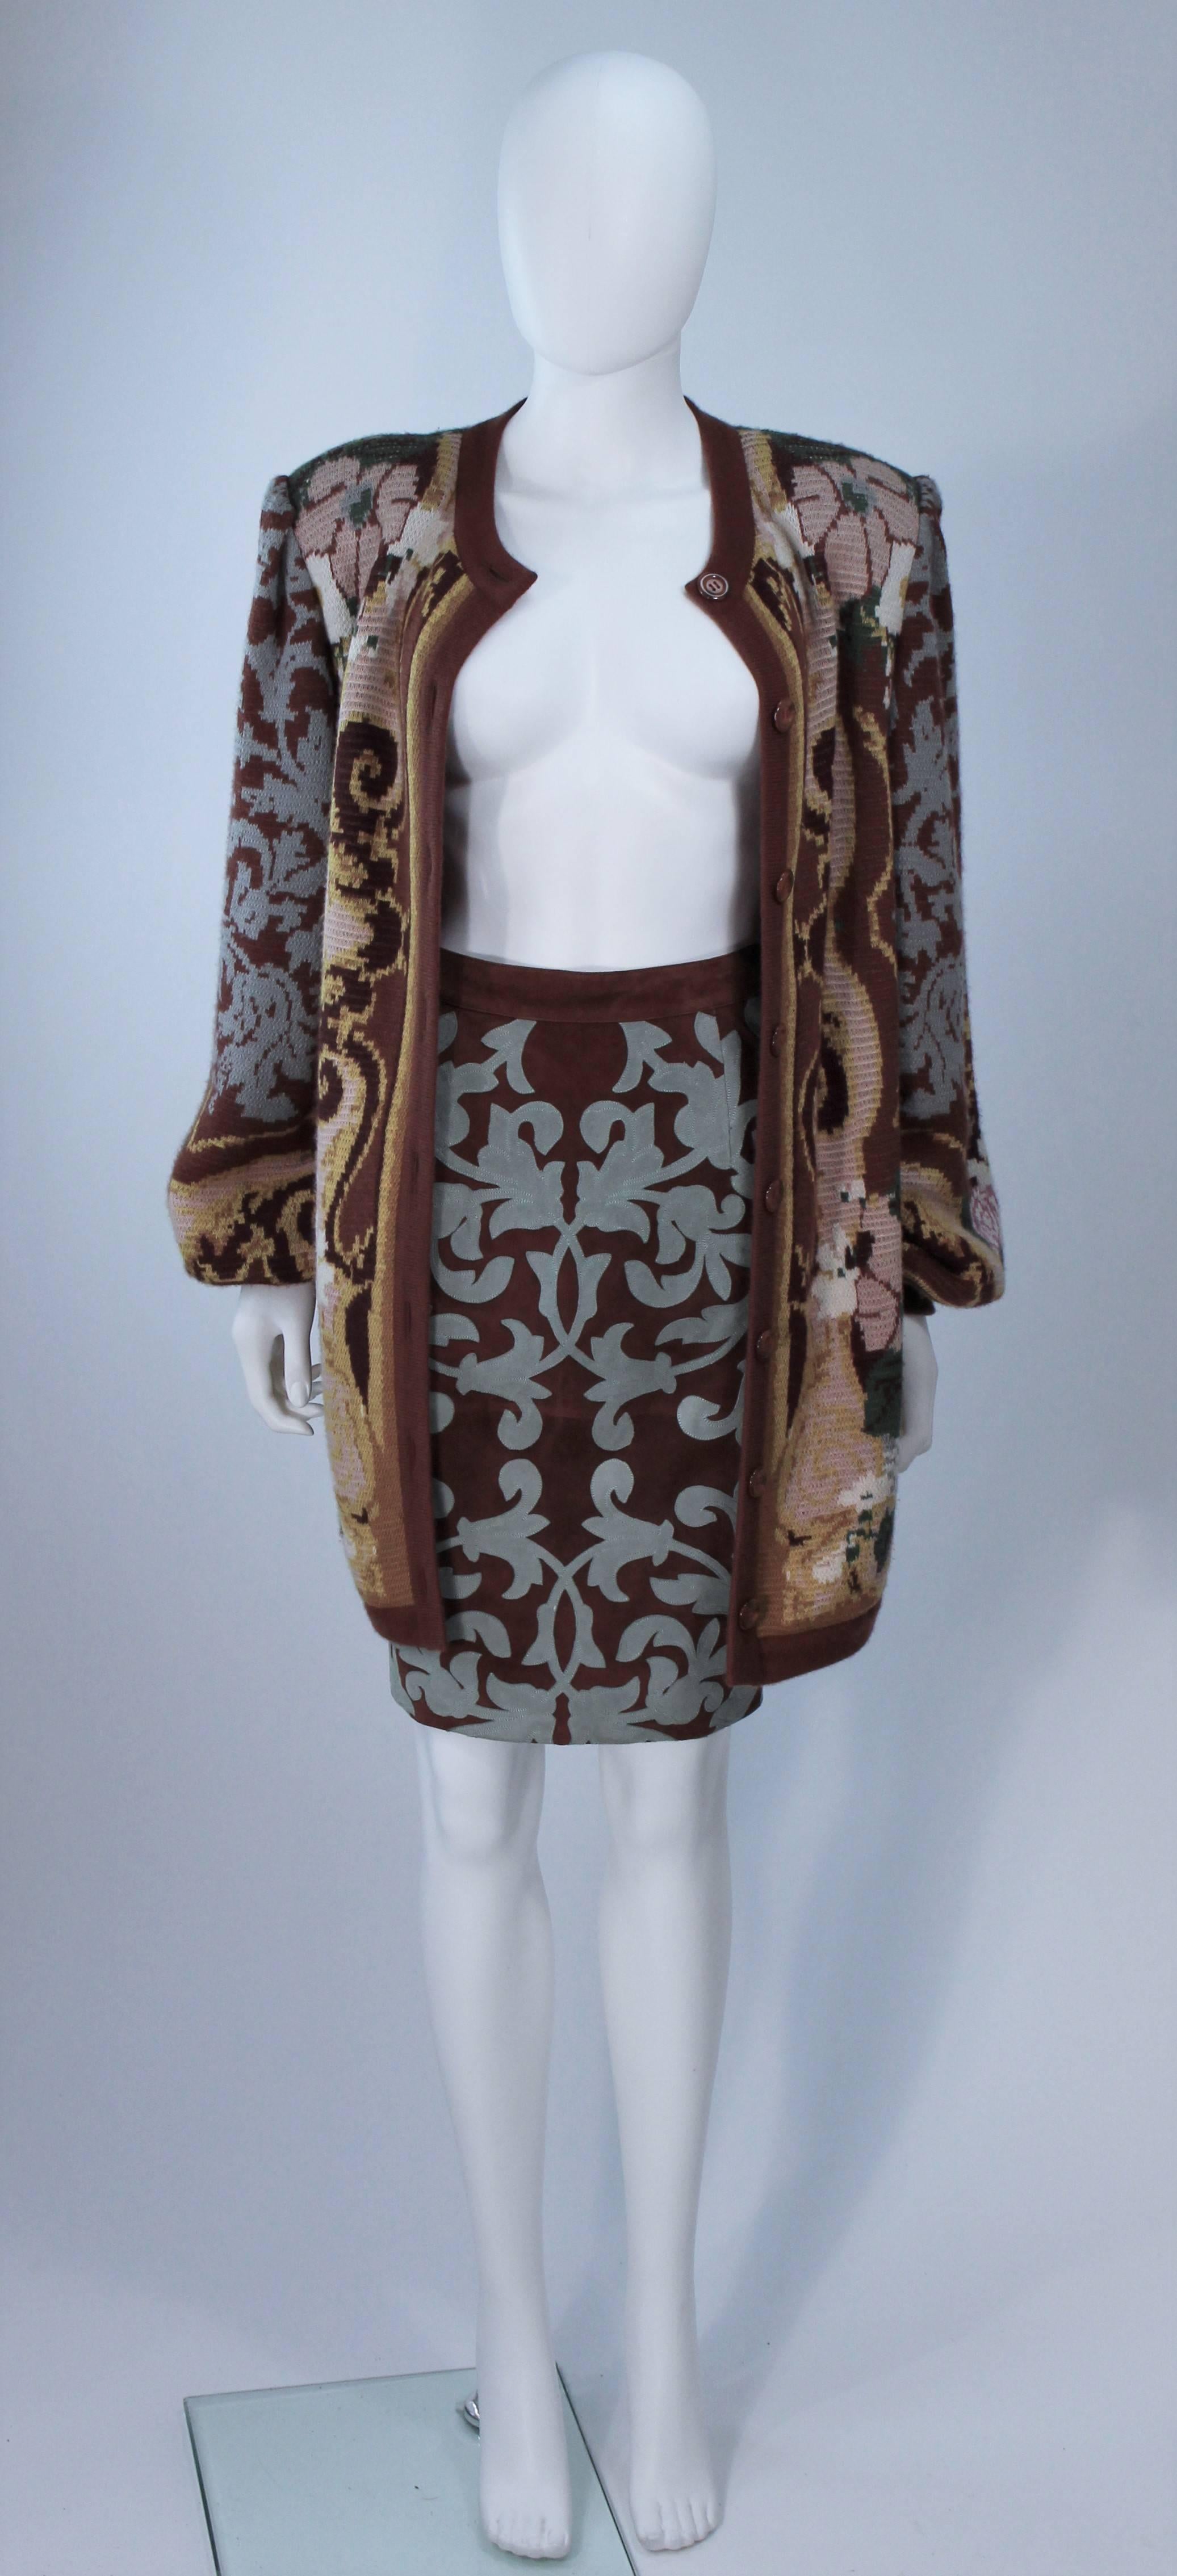  This Valentino ensemble is composed of a cashmere blend sweater and a suede skirt with a patterned applique. The sweater has center front button closures. The skirt has a side zipper closure. In excellent vintage condition. 

**Please